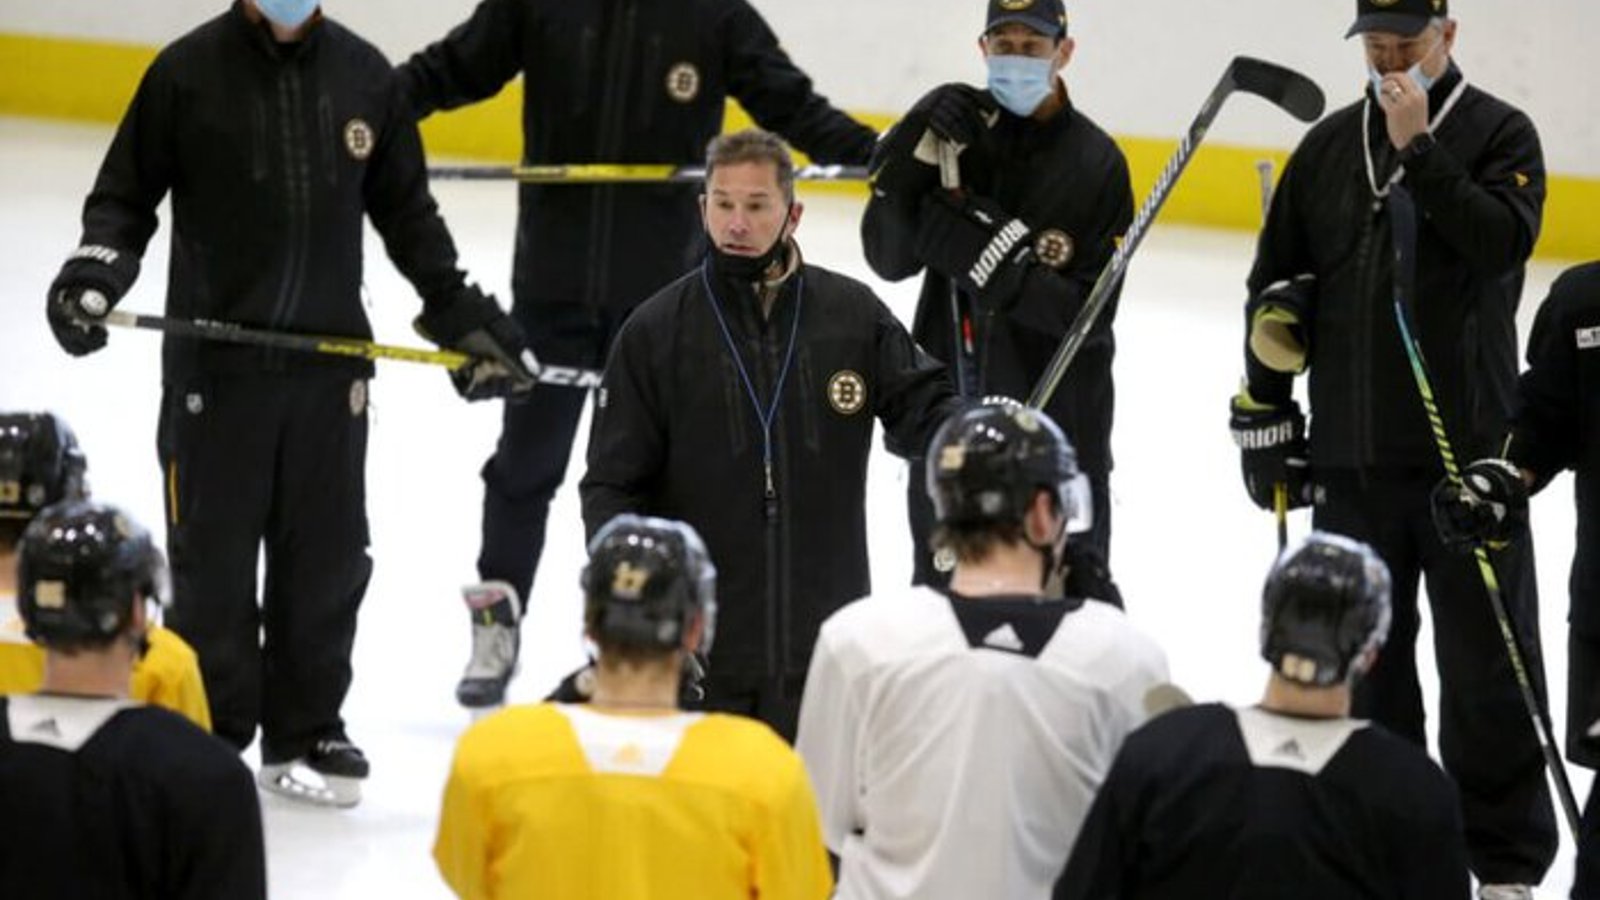 Bruins coach Cassidy flips out and swears at players during practice!